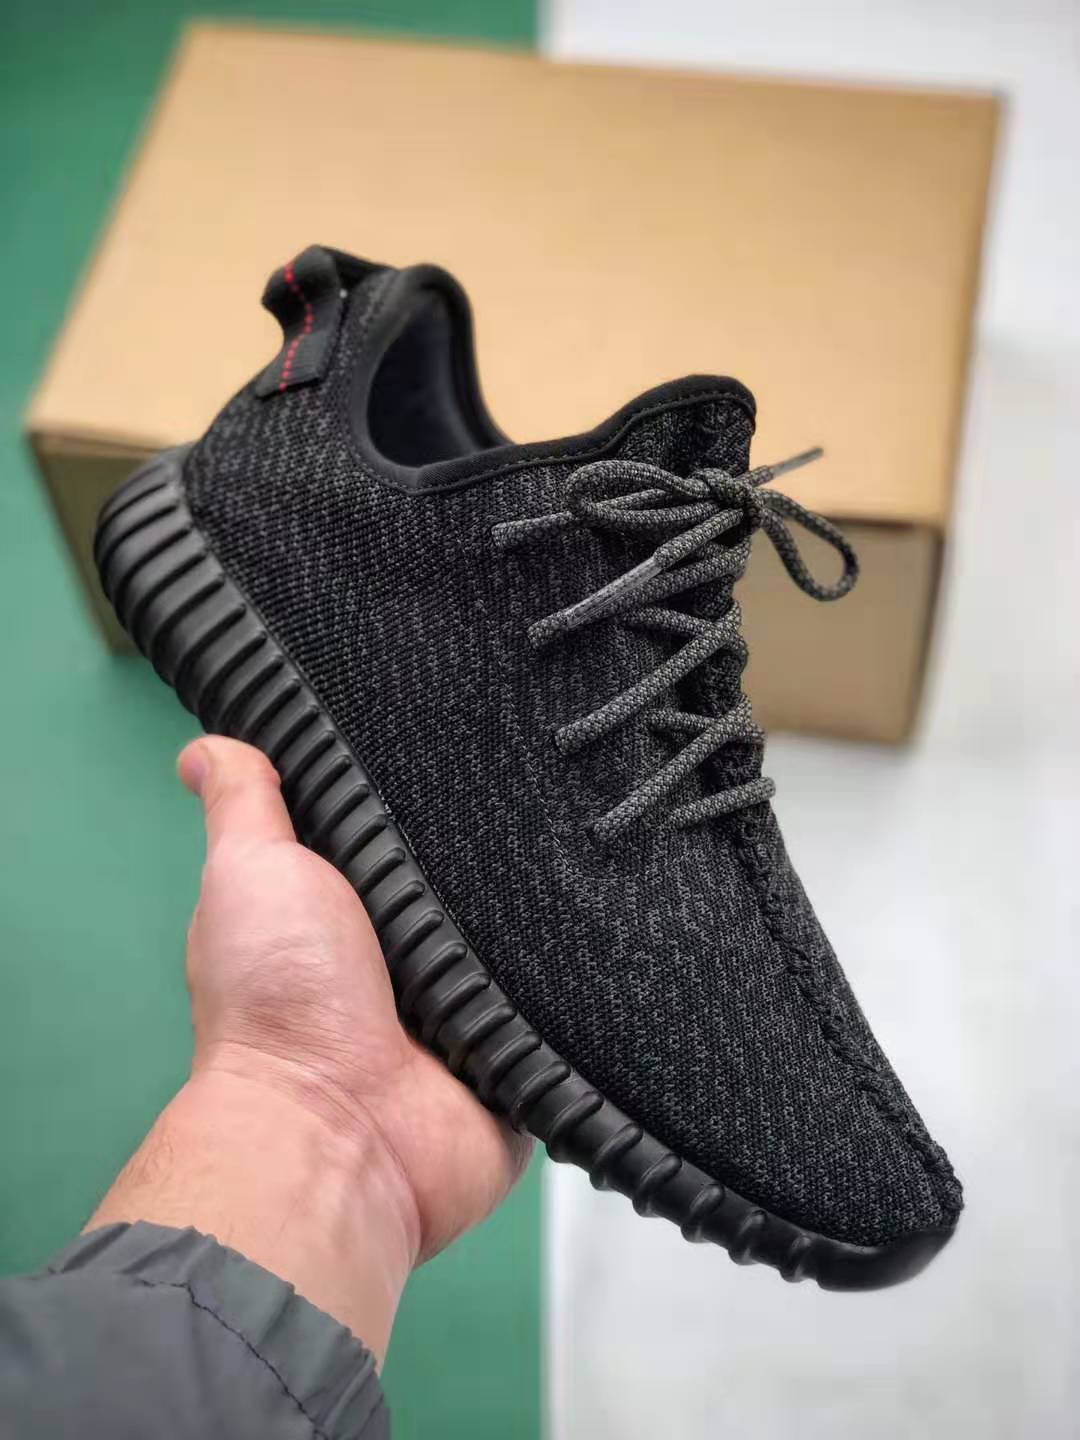 Adidas Yeezy Boost 350 Pirate Black (2016) - Limited Edition Sneakers